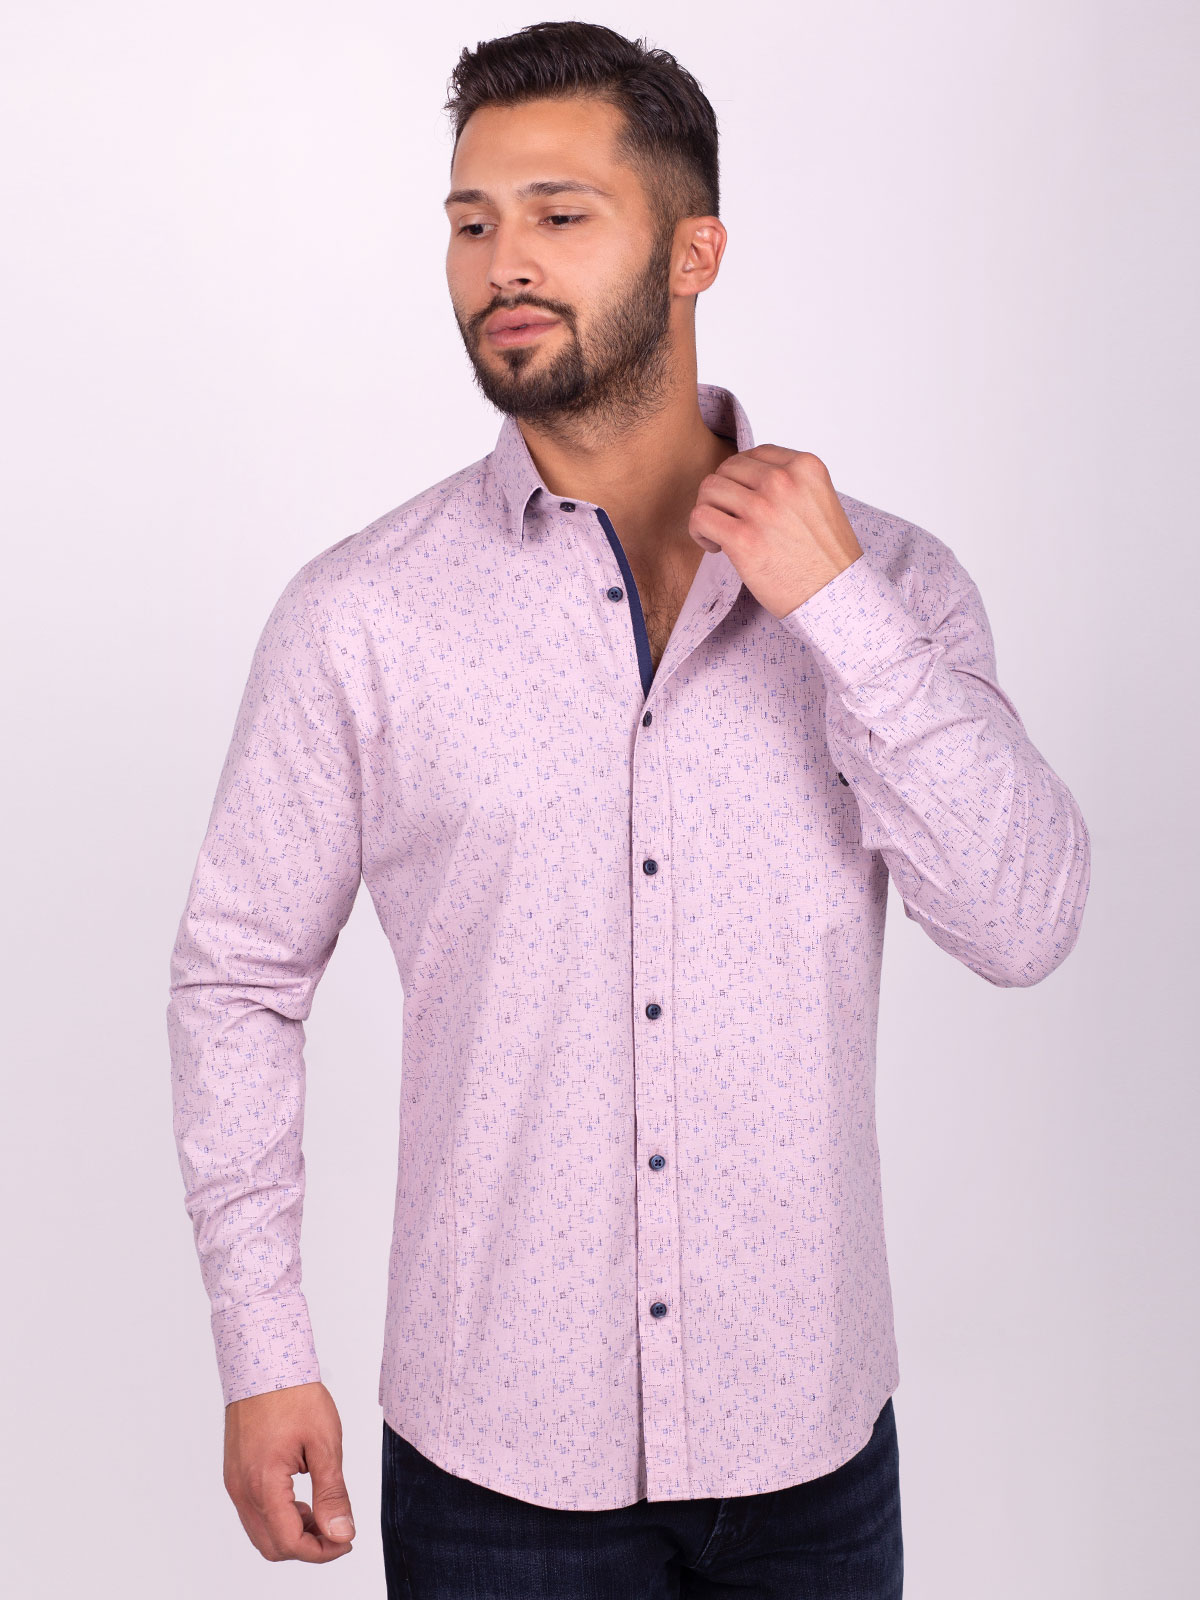 Shirt in light purple with a print of fi - 21516 € 41.62 img3